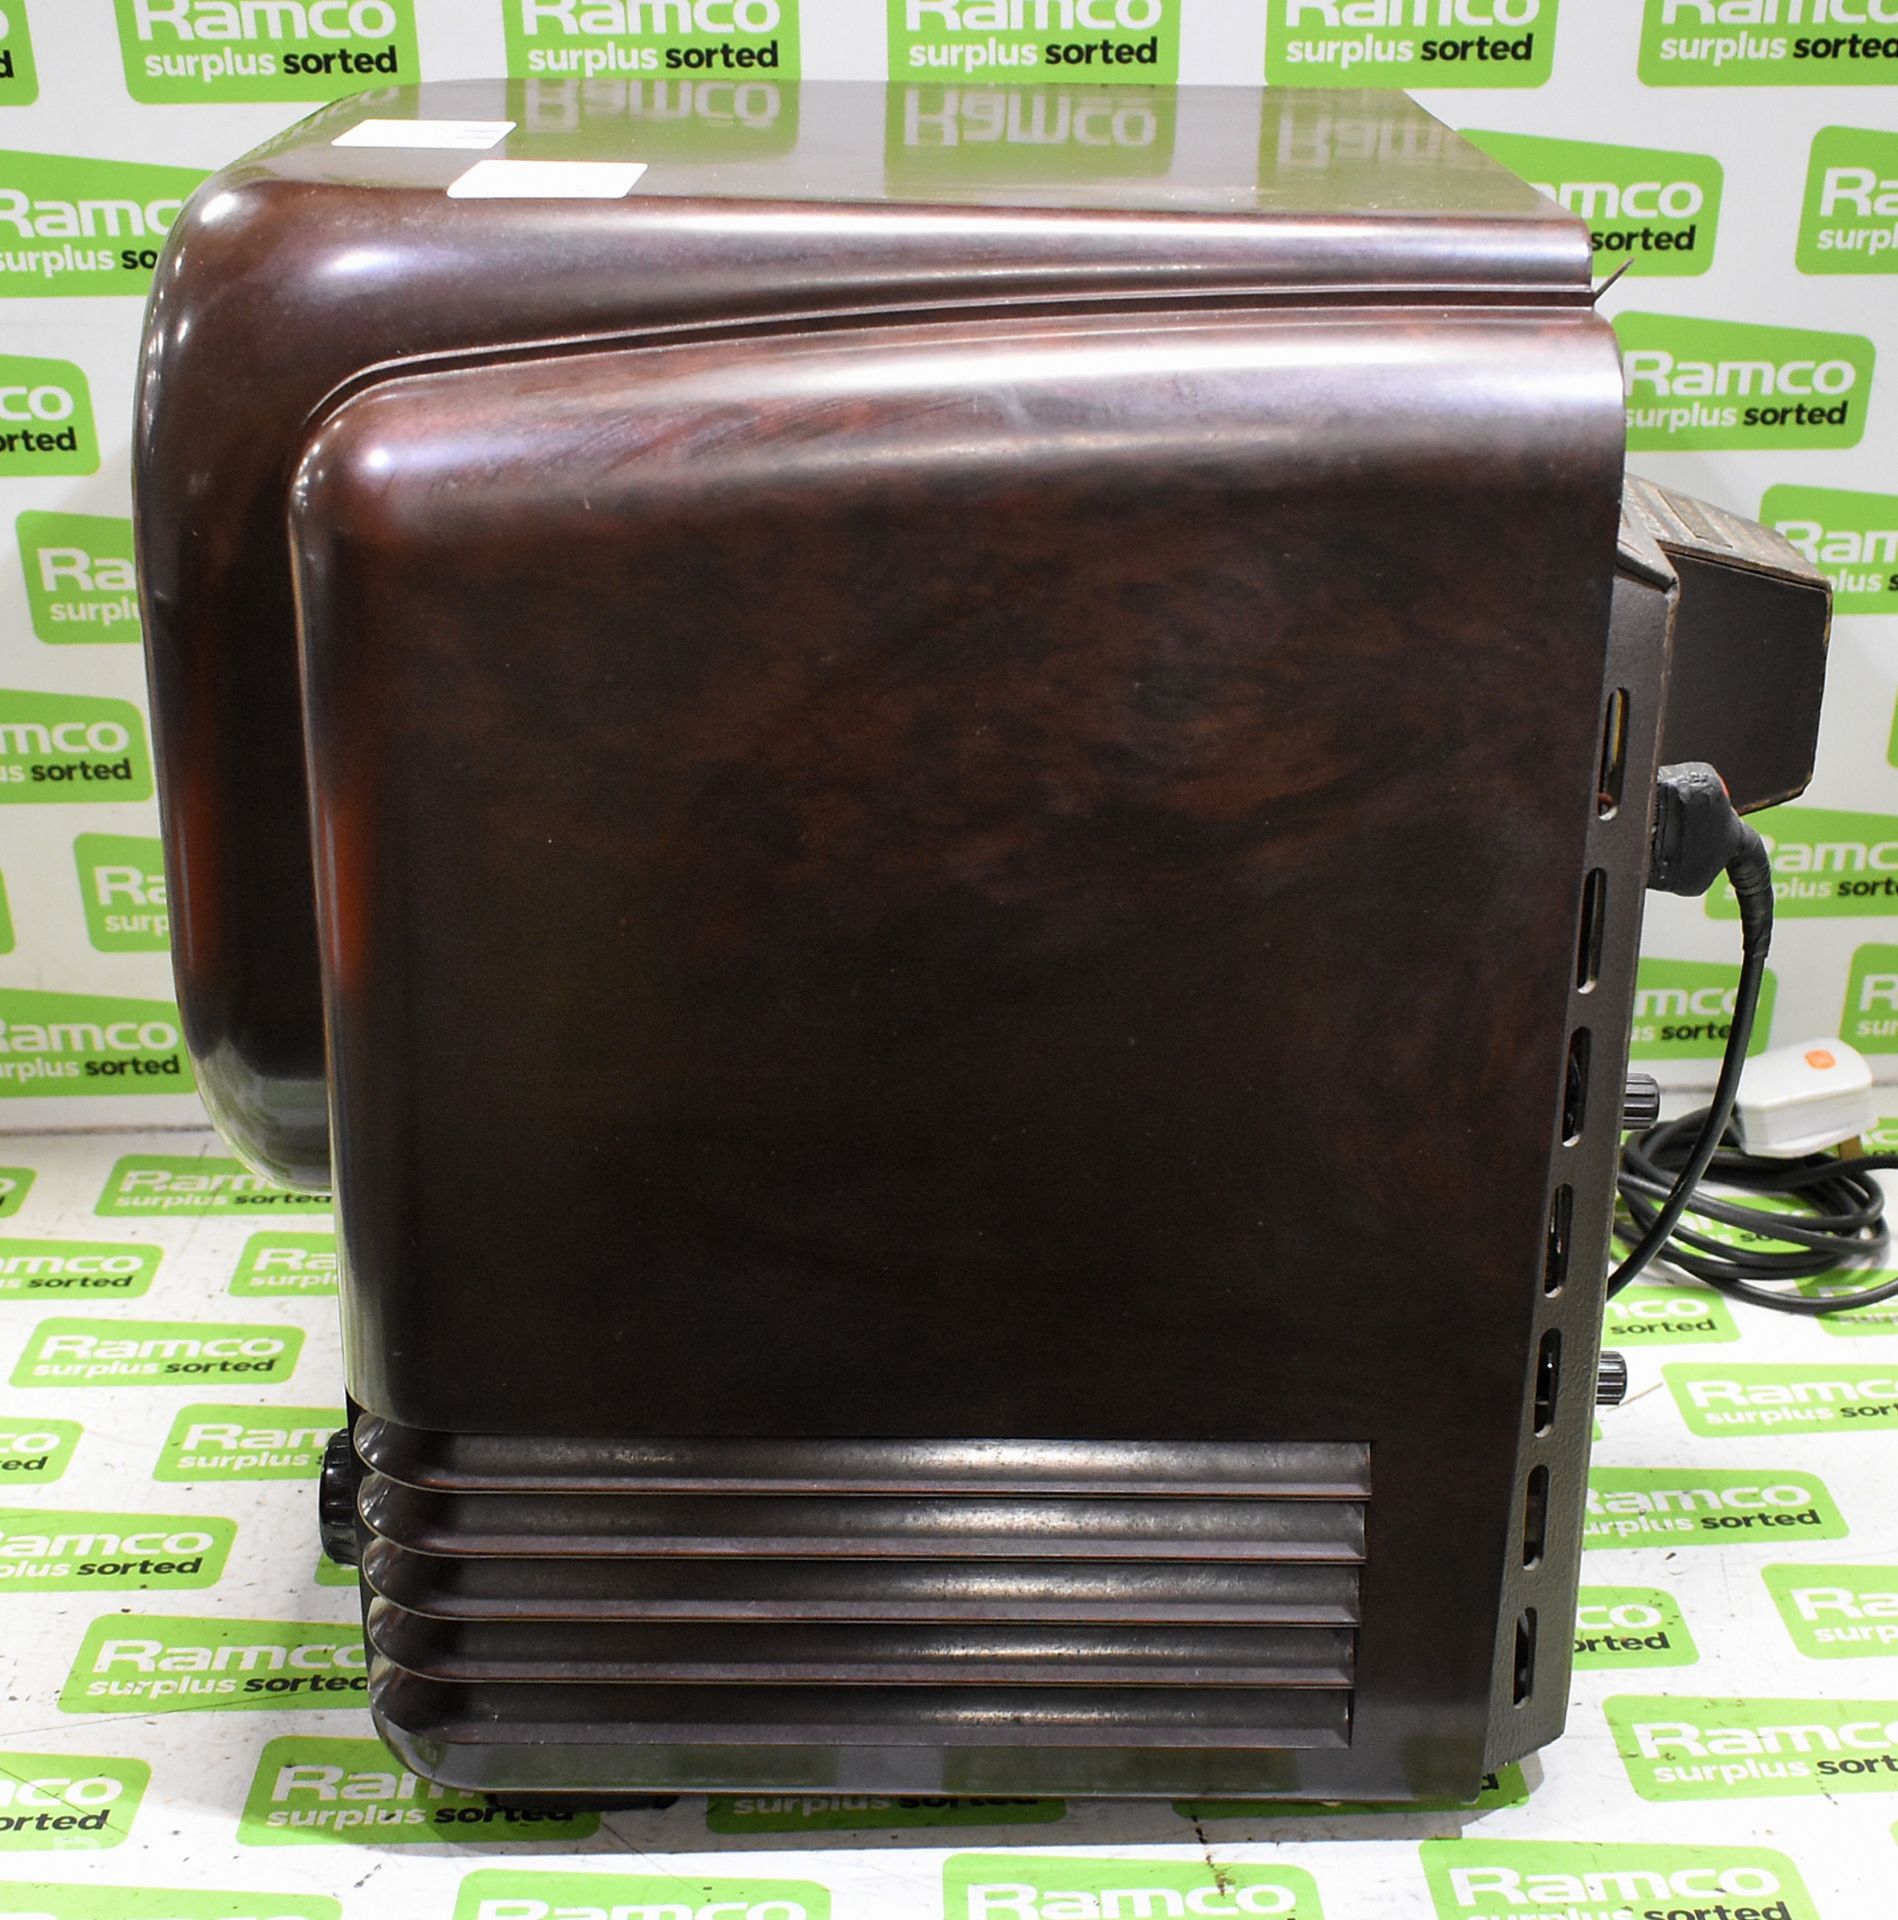 Bush TV 12 AM - 9 inch bakelite television with aerial - Image 3 of 10